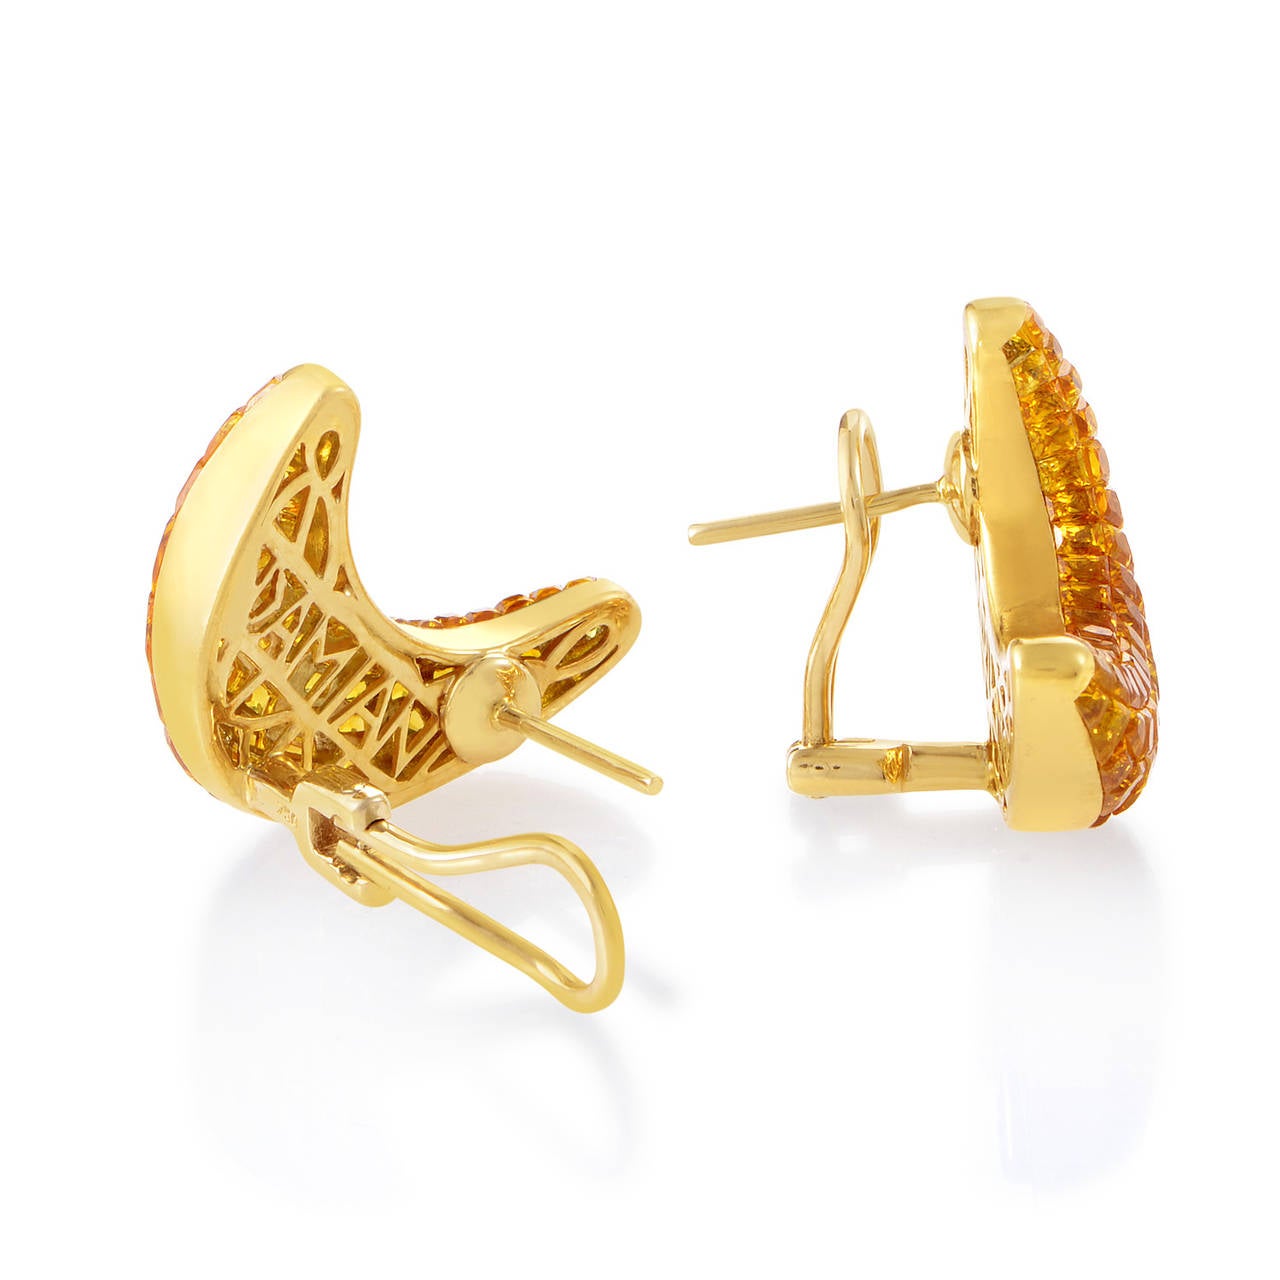 Boasting pleasant unconventional form these eye-catching earrings designed by Damiani offer stylish cheery appearance; the pair is made of radiant 18K yellow gold marvelously combined with attractive yellow sapphires weighing 7.00 carats in total.